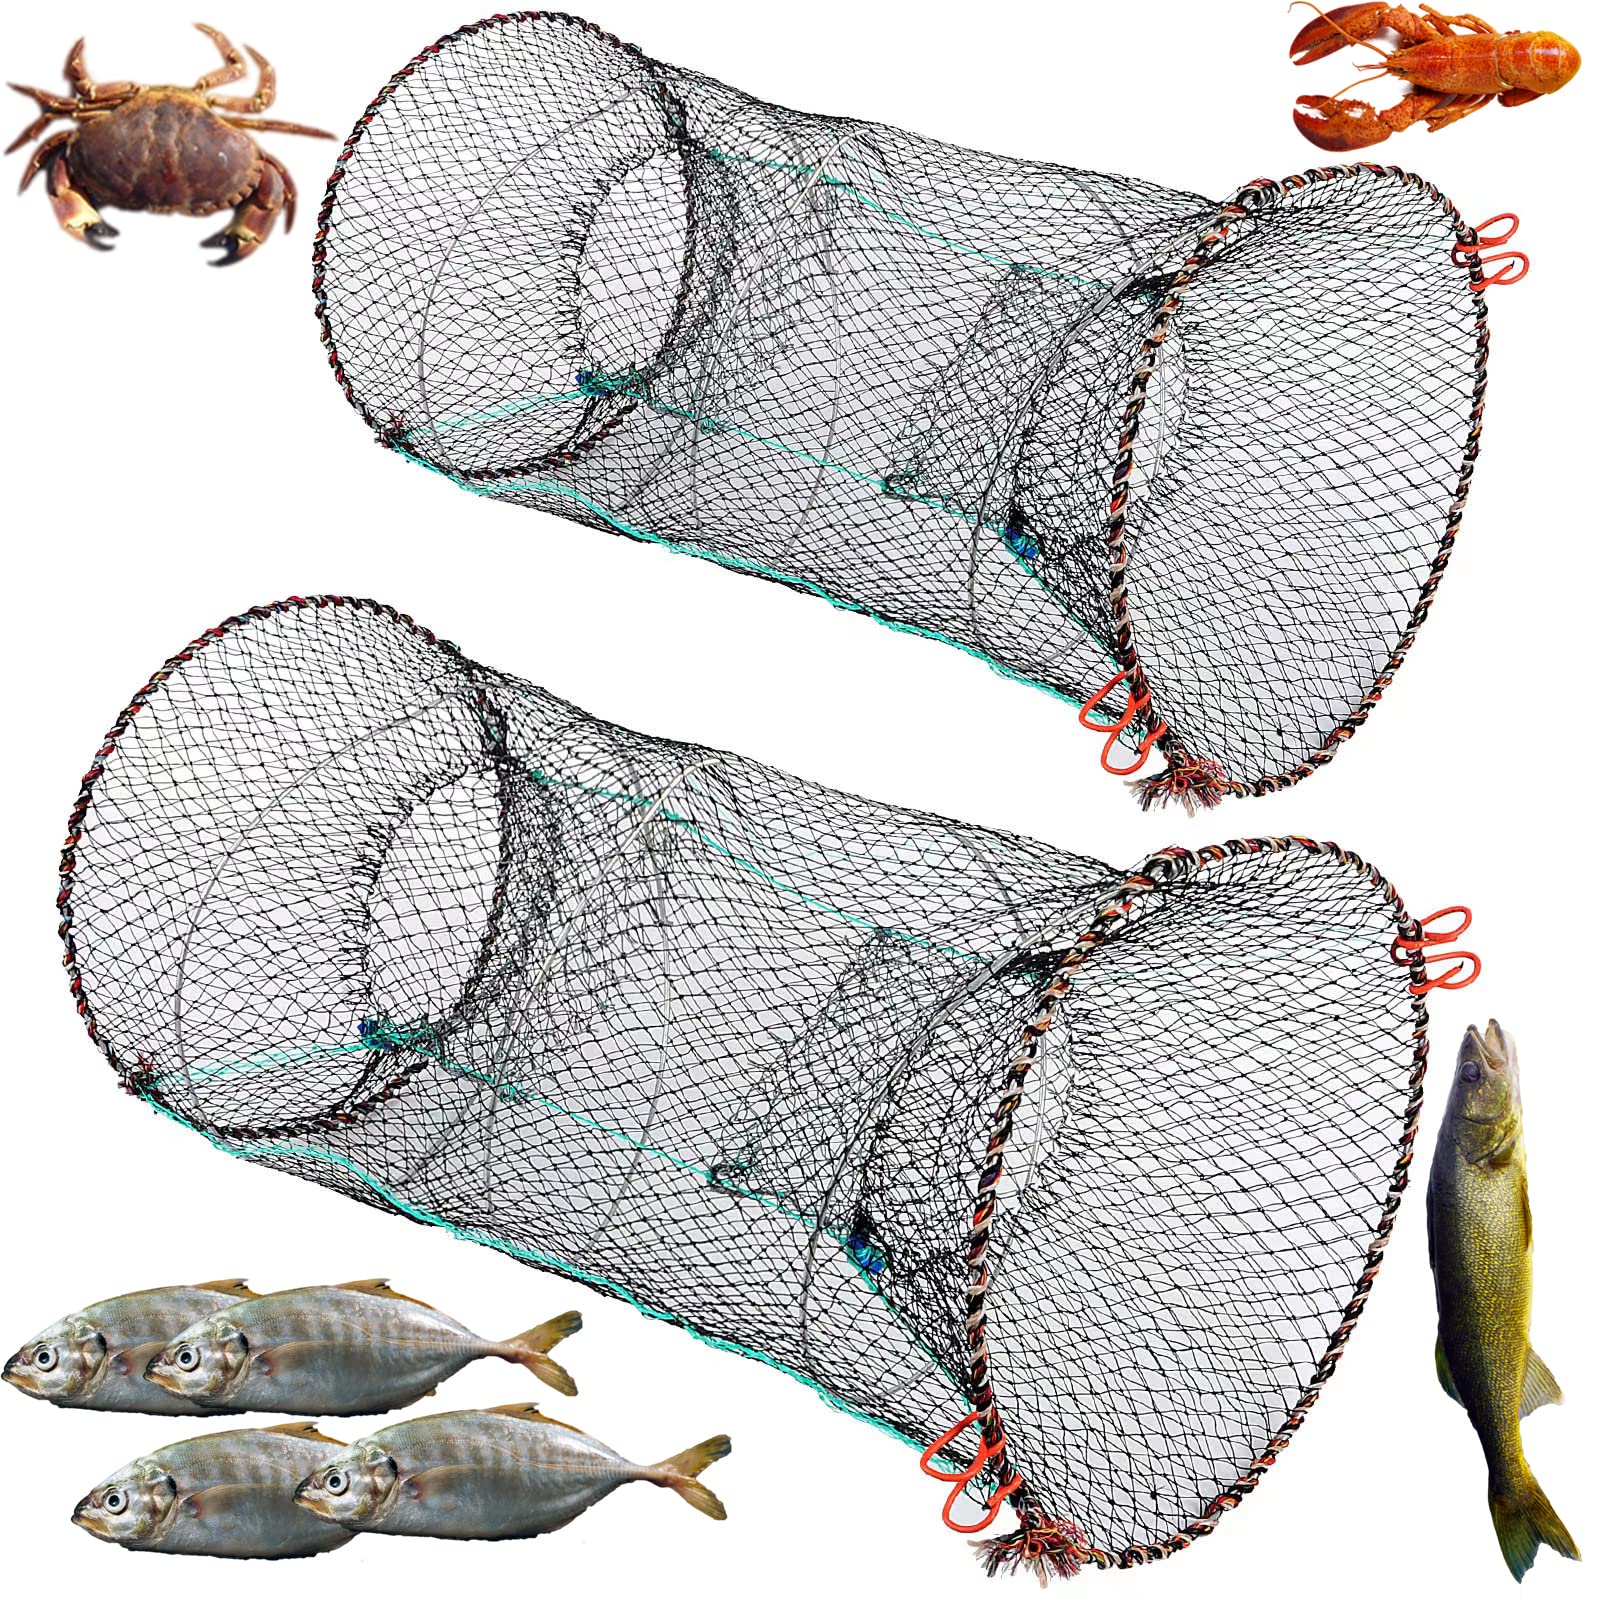 Nswdhy Fishing Bait Trap,2 Packs Crab Trap Minnow Trap Crawfish Trap  Lobster Shrimp Collapsible Cast